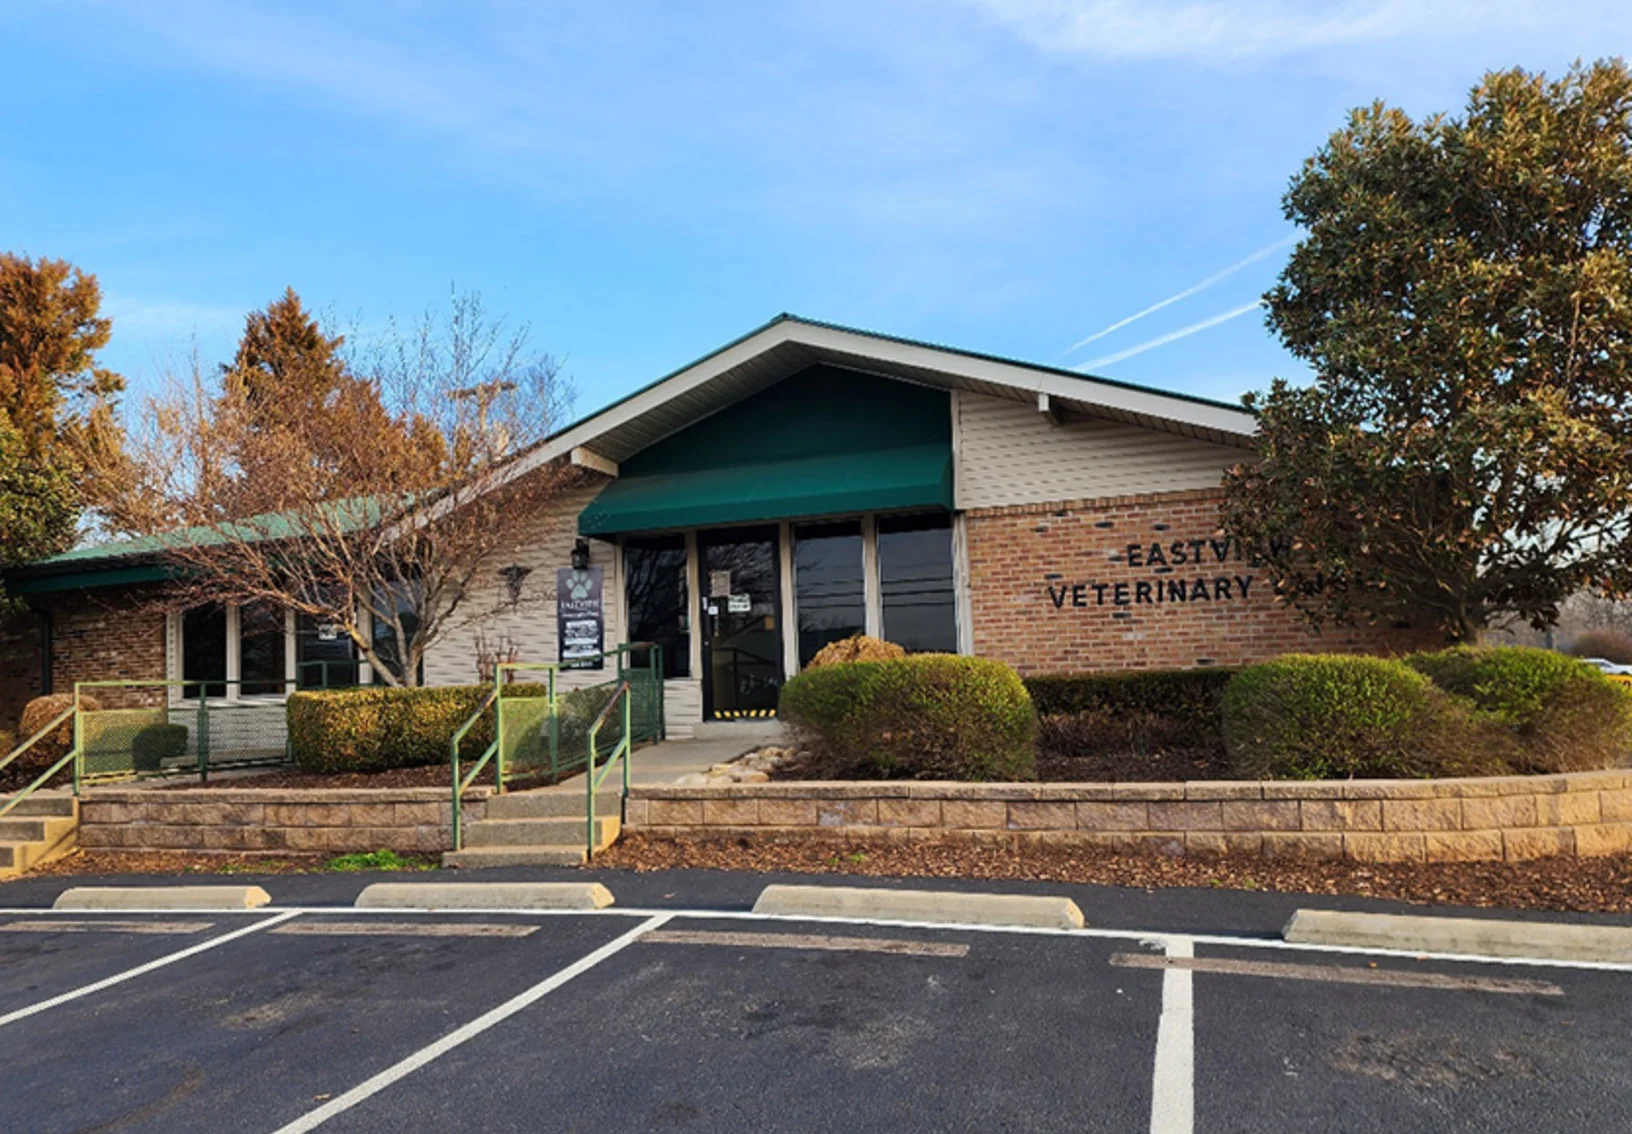 Exterior view of Eastview Veterinary Clinic in Clarksville, TN